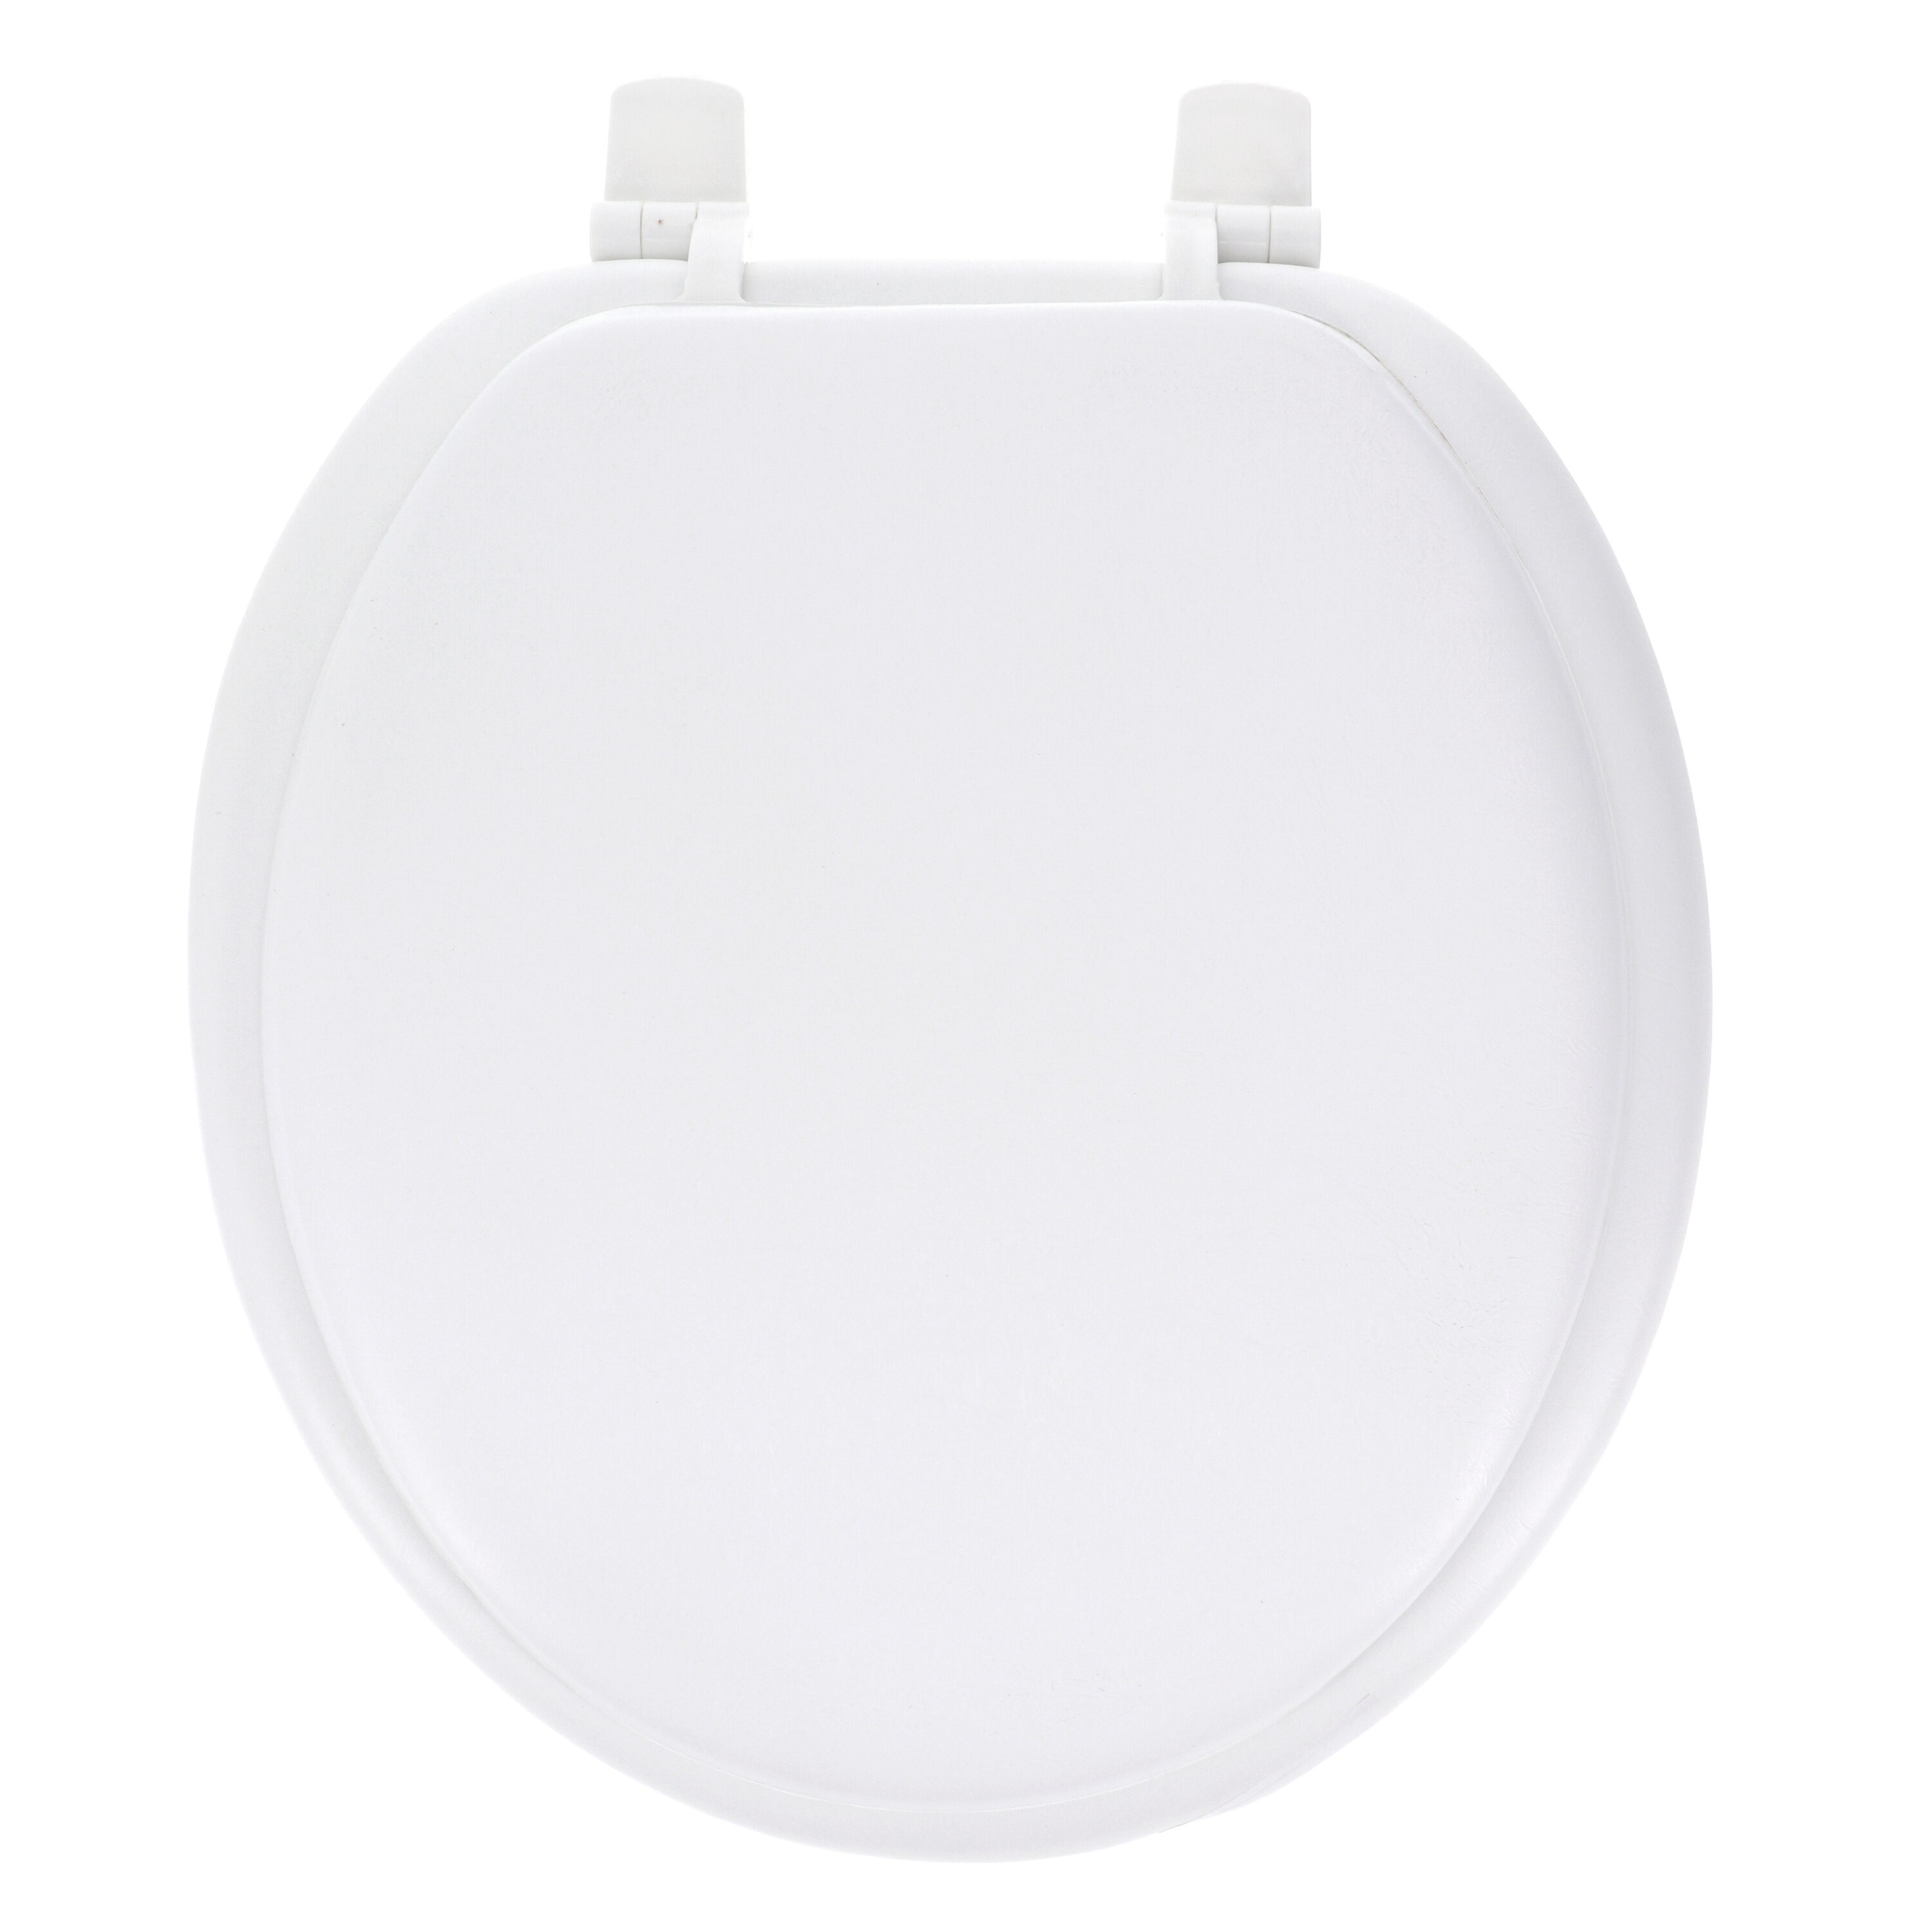 PCP Padded Toilet Seat Cushion